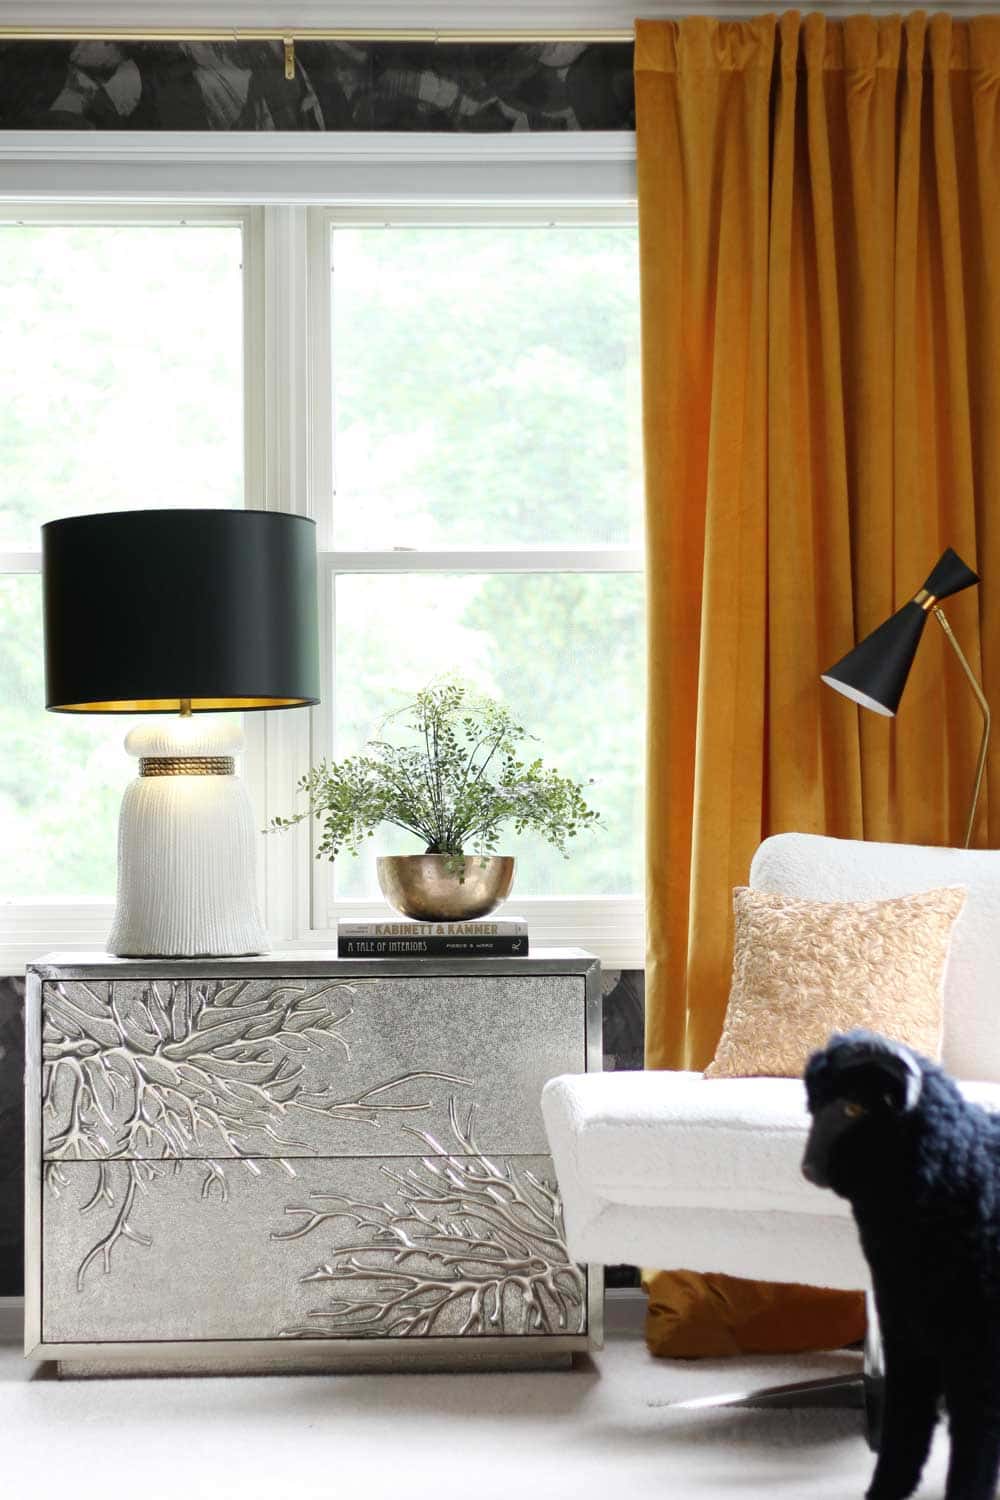 Where to buy affordable curtains that look expensive